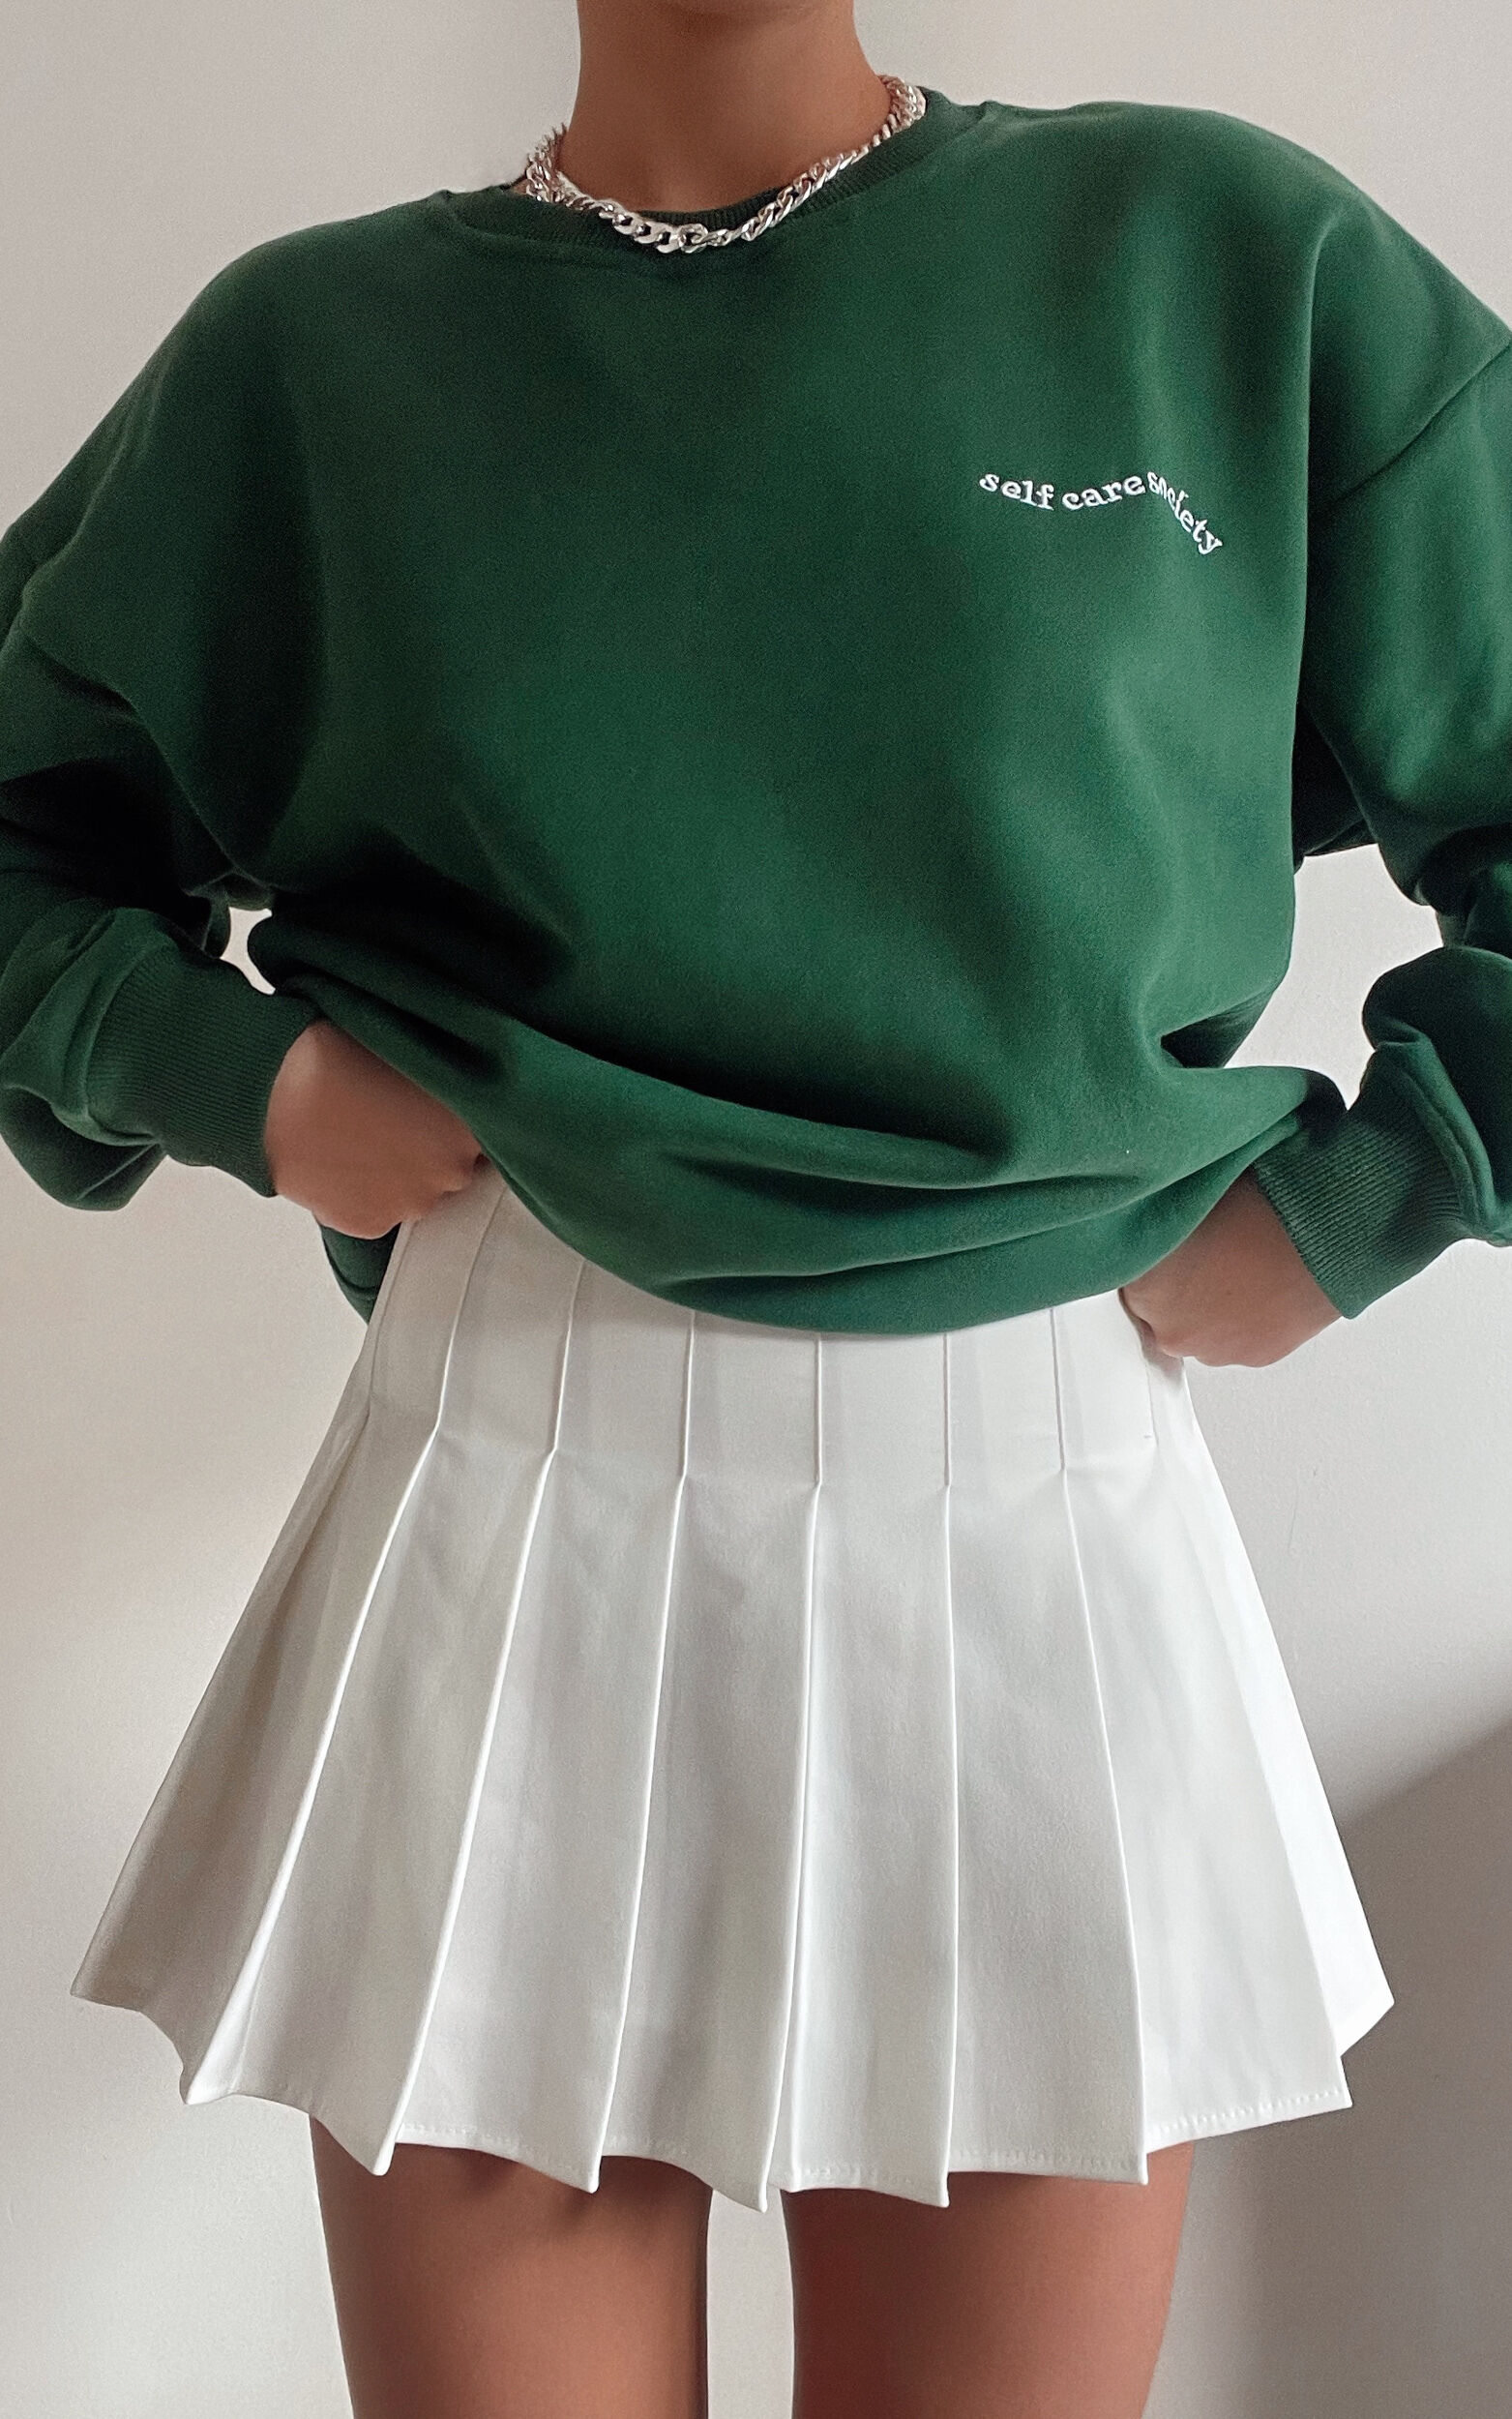 Sunday Society Club - Gael Sweatshirt in Green - 04, GRN2, super-hi-res image number null